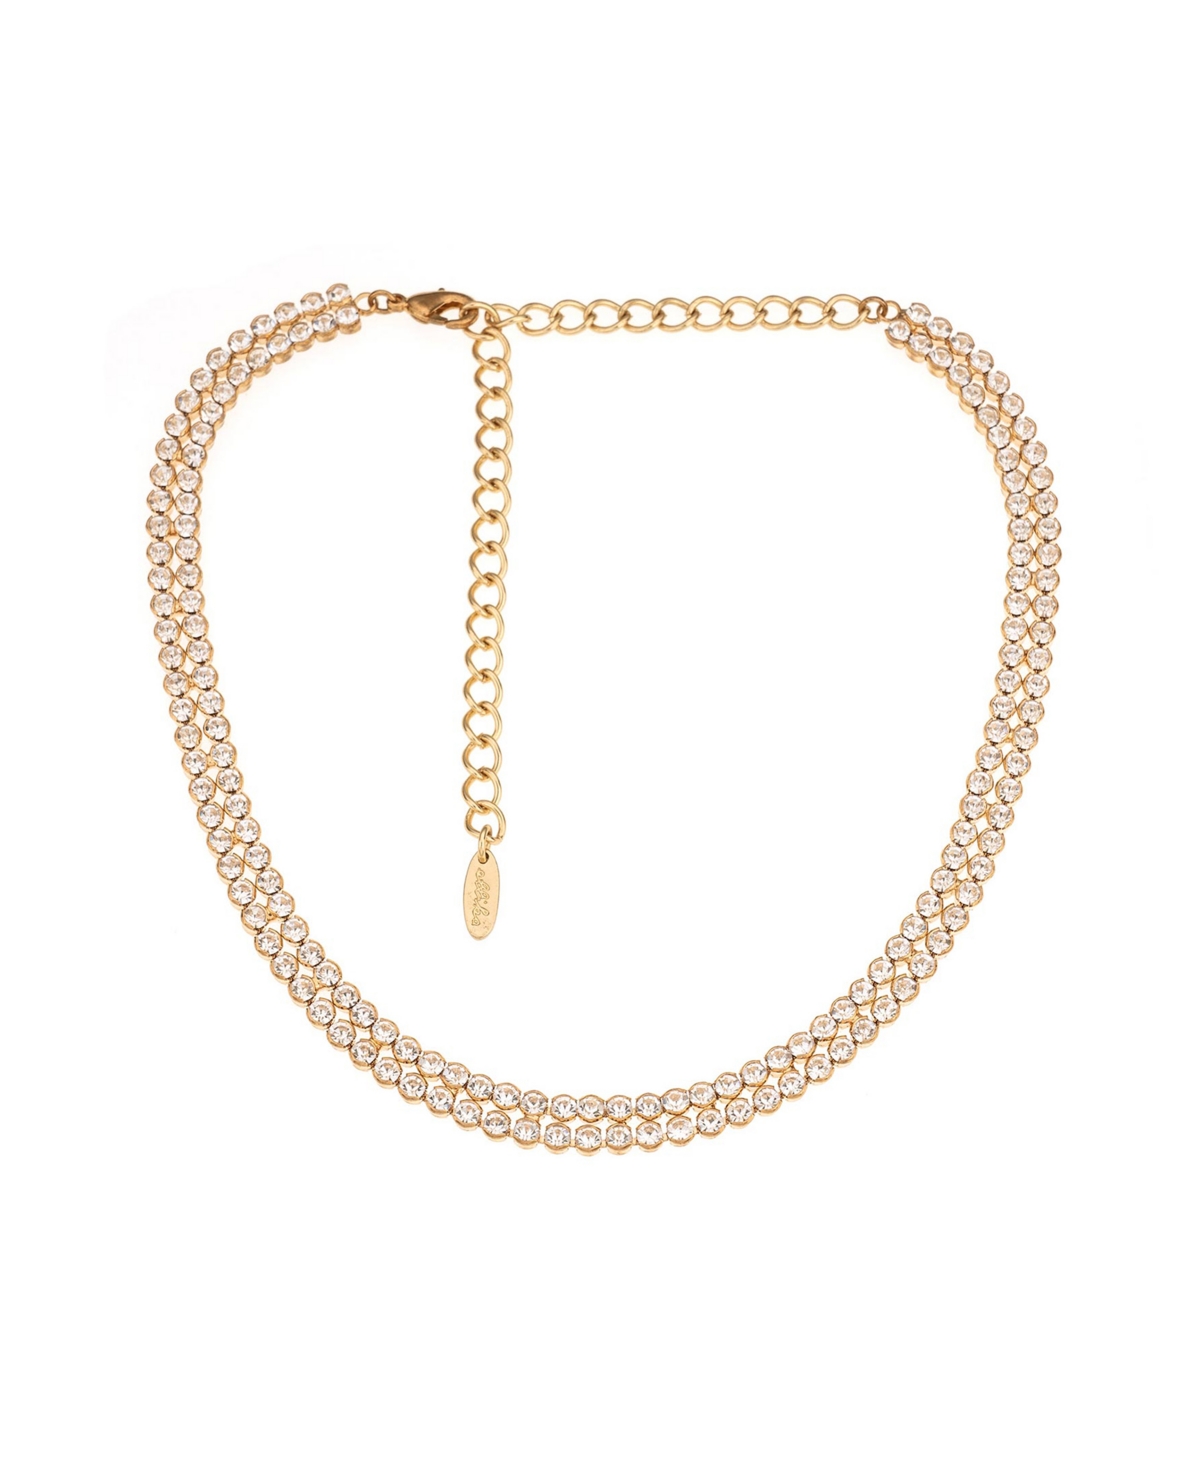 Double Row Sparkle 18K Gold Plated Choker Necklace - Gold